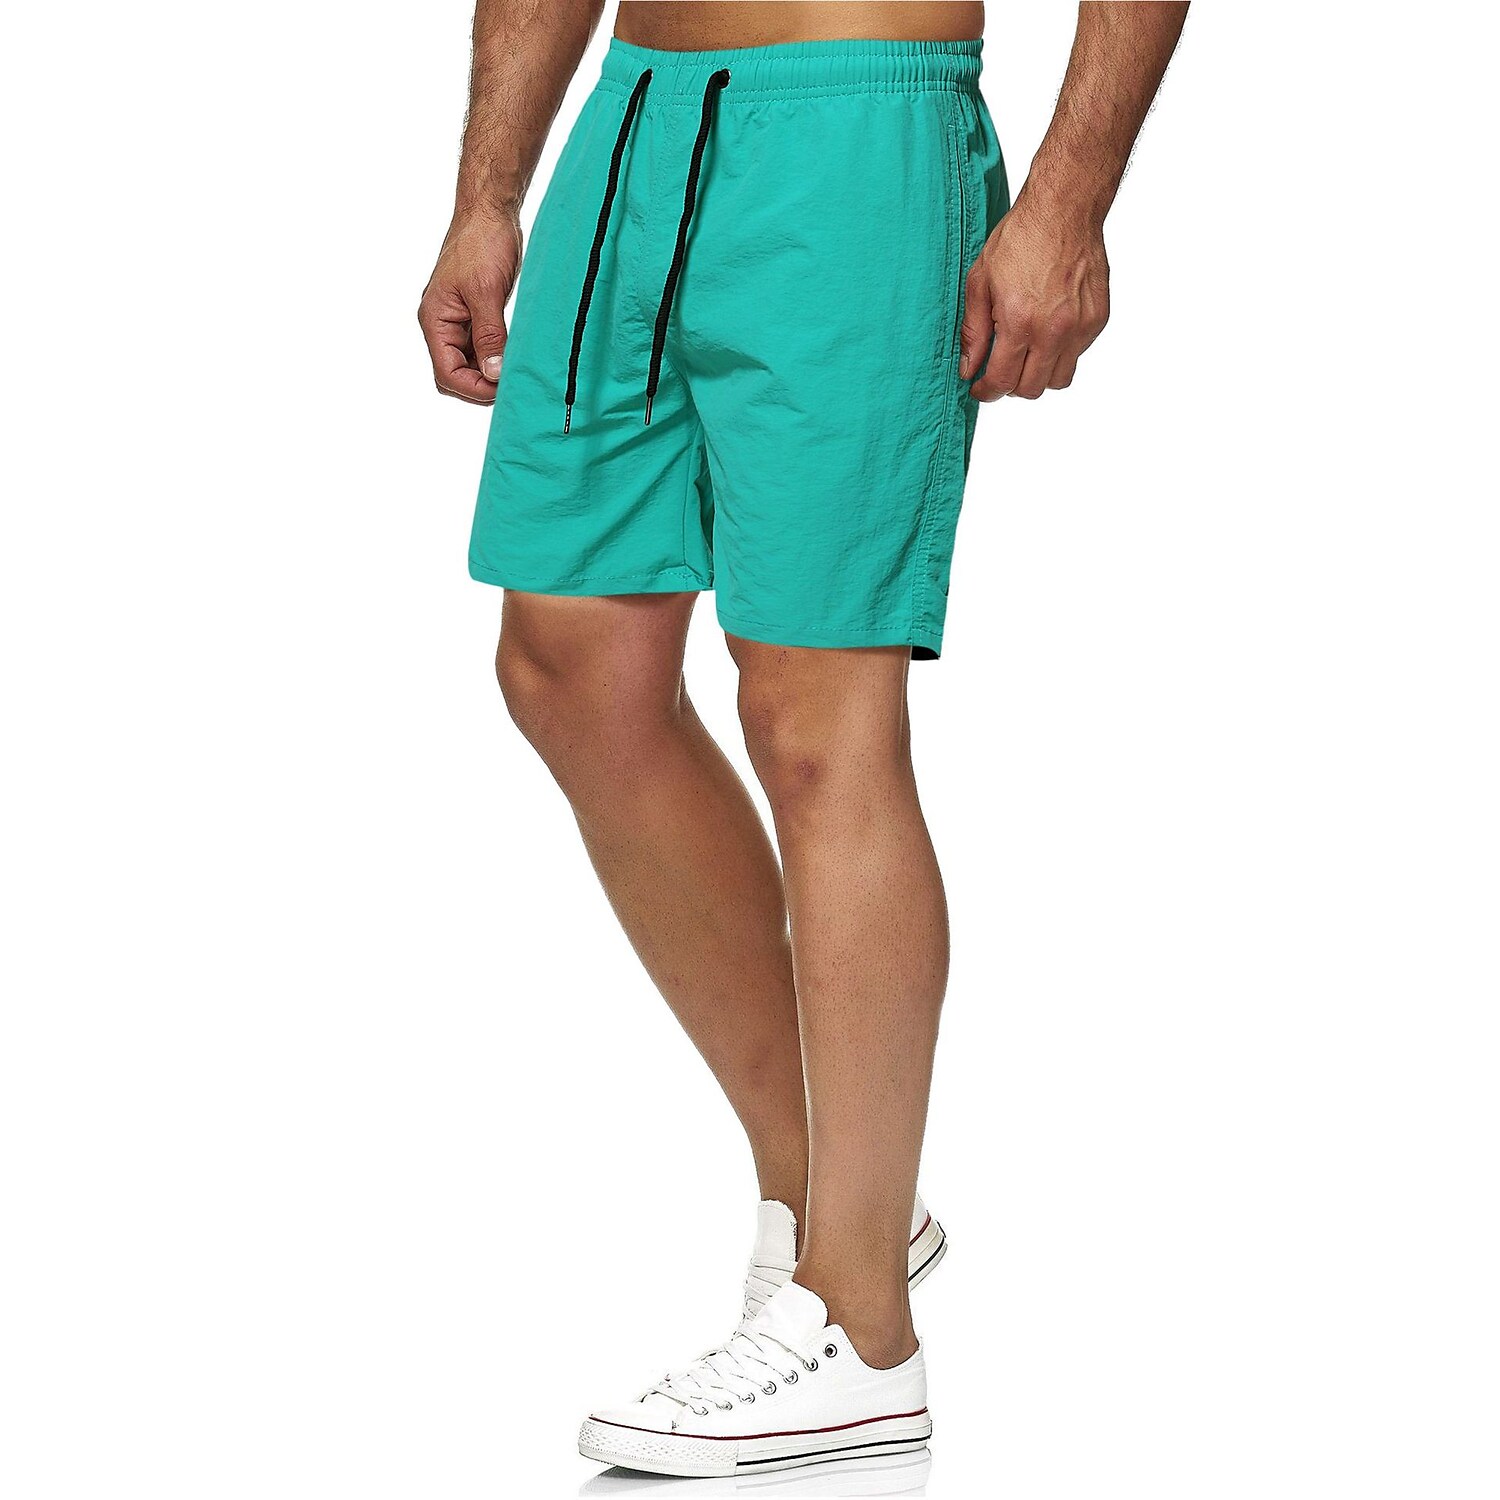 Men's Sport Runing Swimming Pockets Drawstring Breathable Solid Color Shorts 